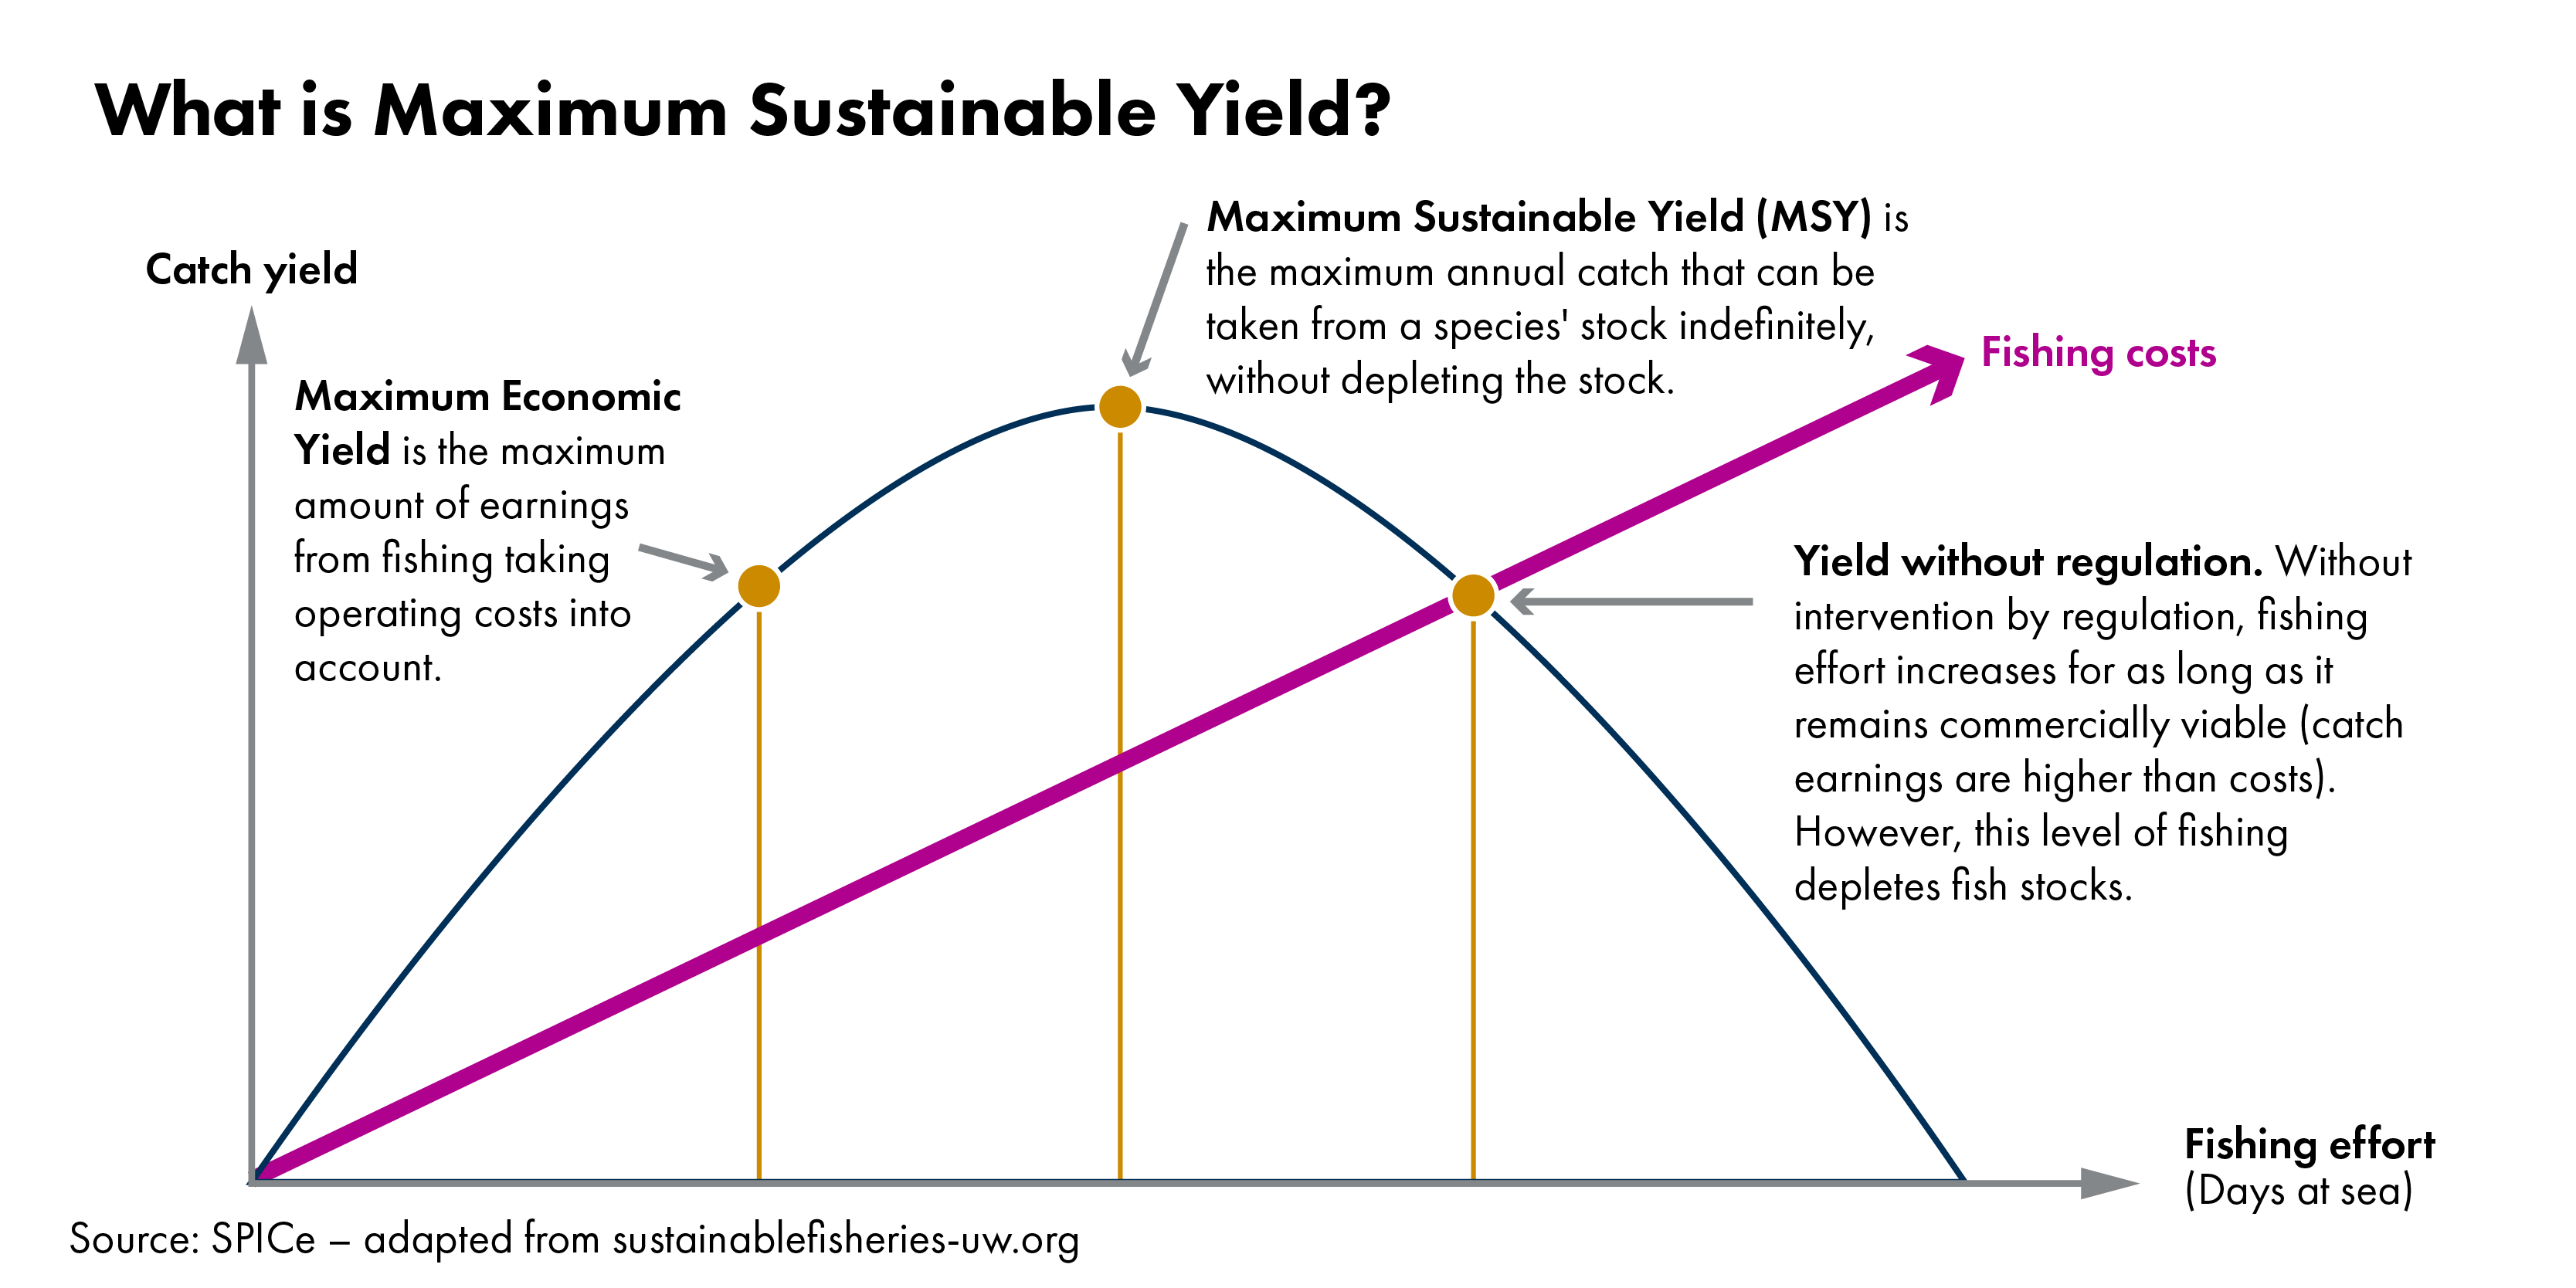 Chart showing a conceptual graph of Maximum Sustainable Yield. On the X axis is fishing effort. The Y axis is catch yield. The chart shows a bell curve with a linear line indicating fishing costs. There are 3 points marked on the curve. The first indicates maximum economic yield. This is the maximum amount of earnings from fishing, taking operating costs into account. The second point is at the peak of the curve. This is maximum sustainable yield which is the maximum annual catch that can be taken from a species' stock indefinitely without depleting the stock. The final point intersects the fisheries cost line. This is yield without regulation. Without intervention by regulation, fishing effort increases for as long as it remains commercially viable (catch earnings are higher than costs). However, this level of fishing depletes fish stocks.